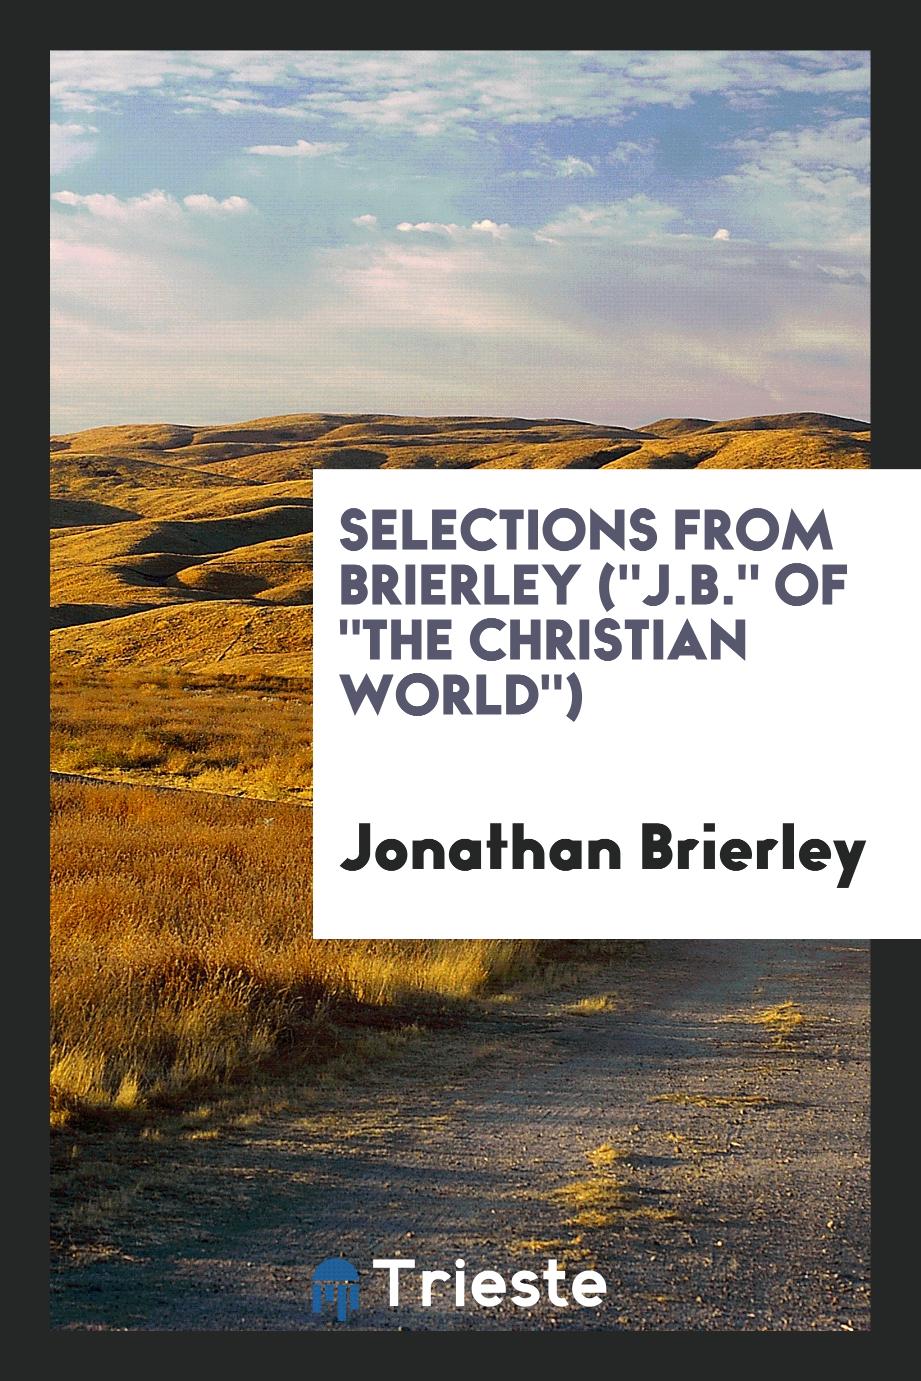 Selections from Brierley ("J.B." of "The Christian world")